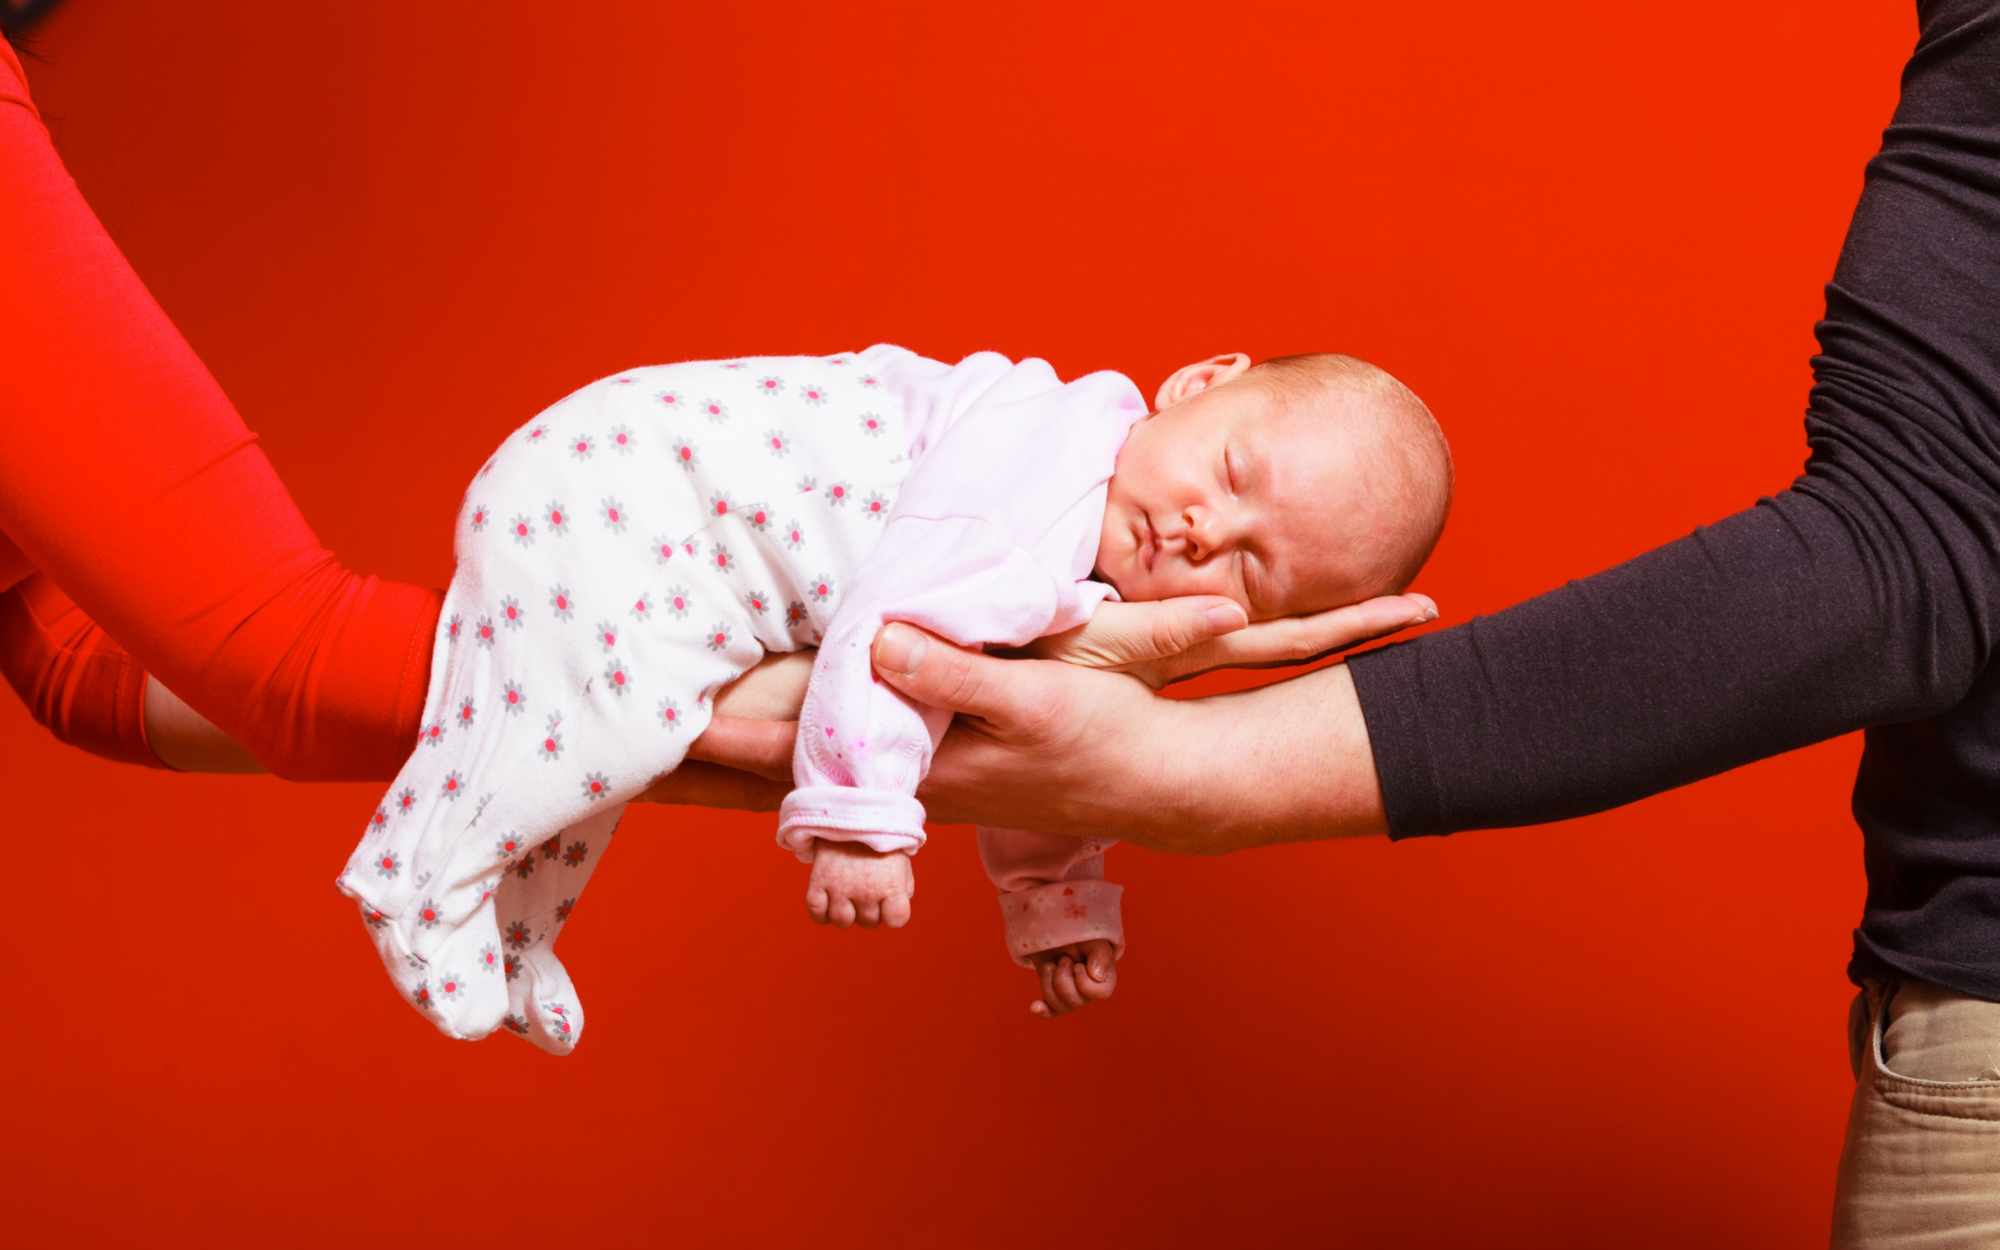 A sleeping baby rests on the hands of two people